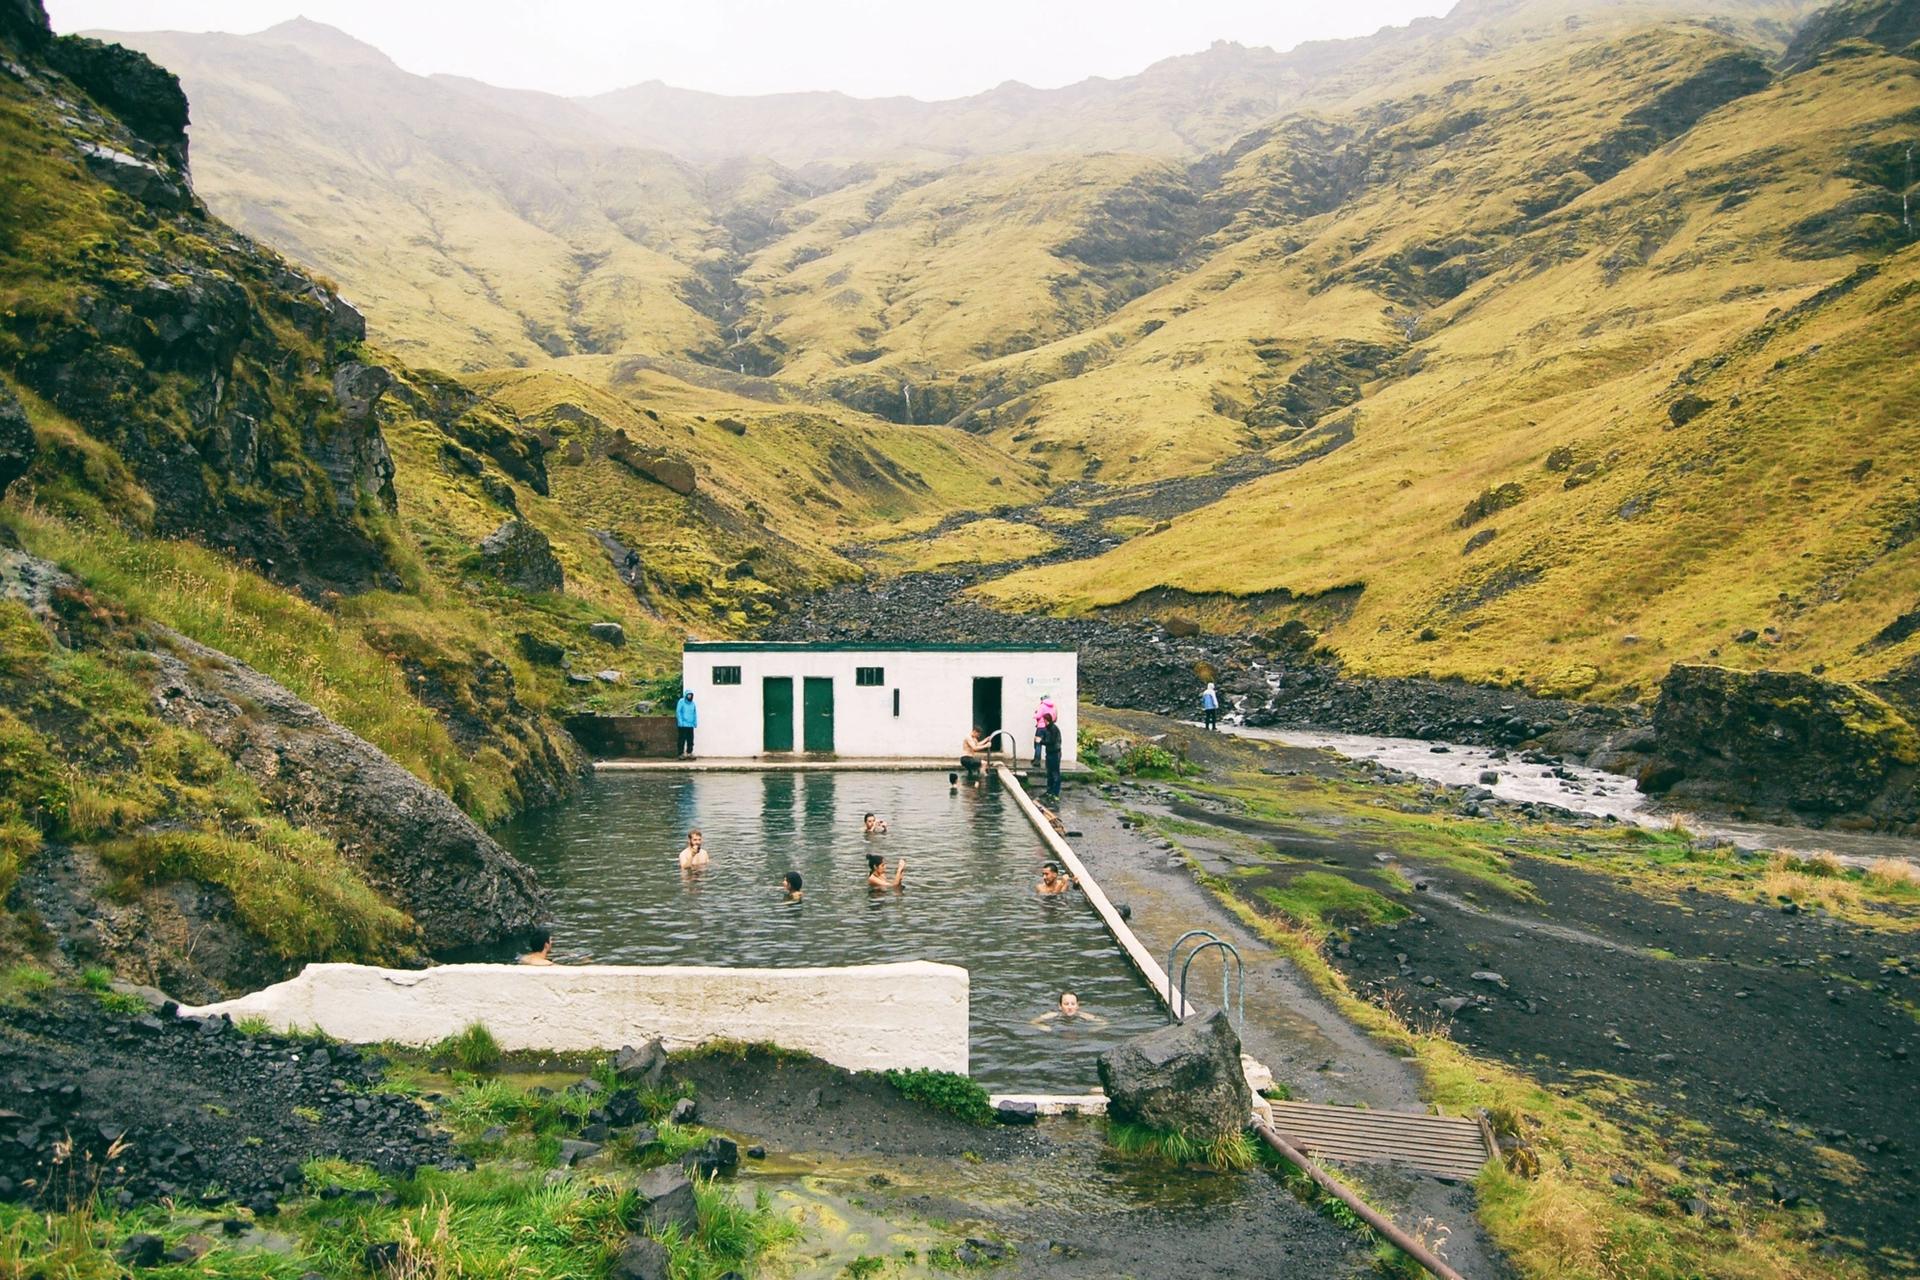 Seljavallalaug hot spring: The Oldest Man-Made natural hot springs in Iceland. just a short detour from the ring road